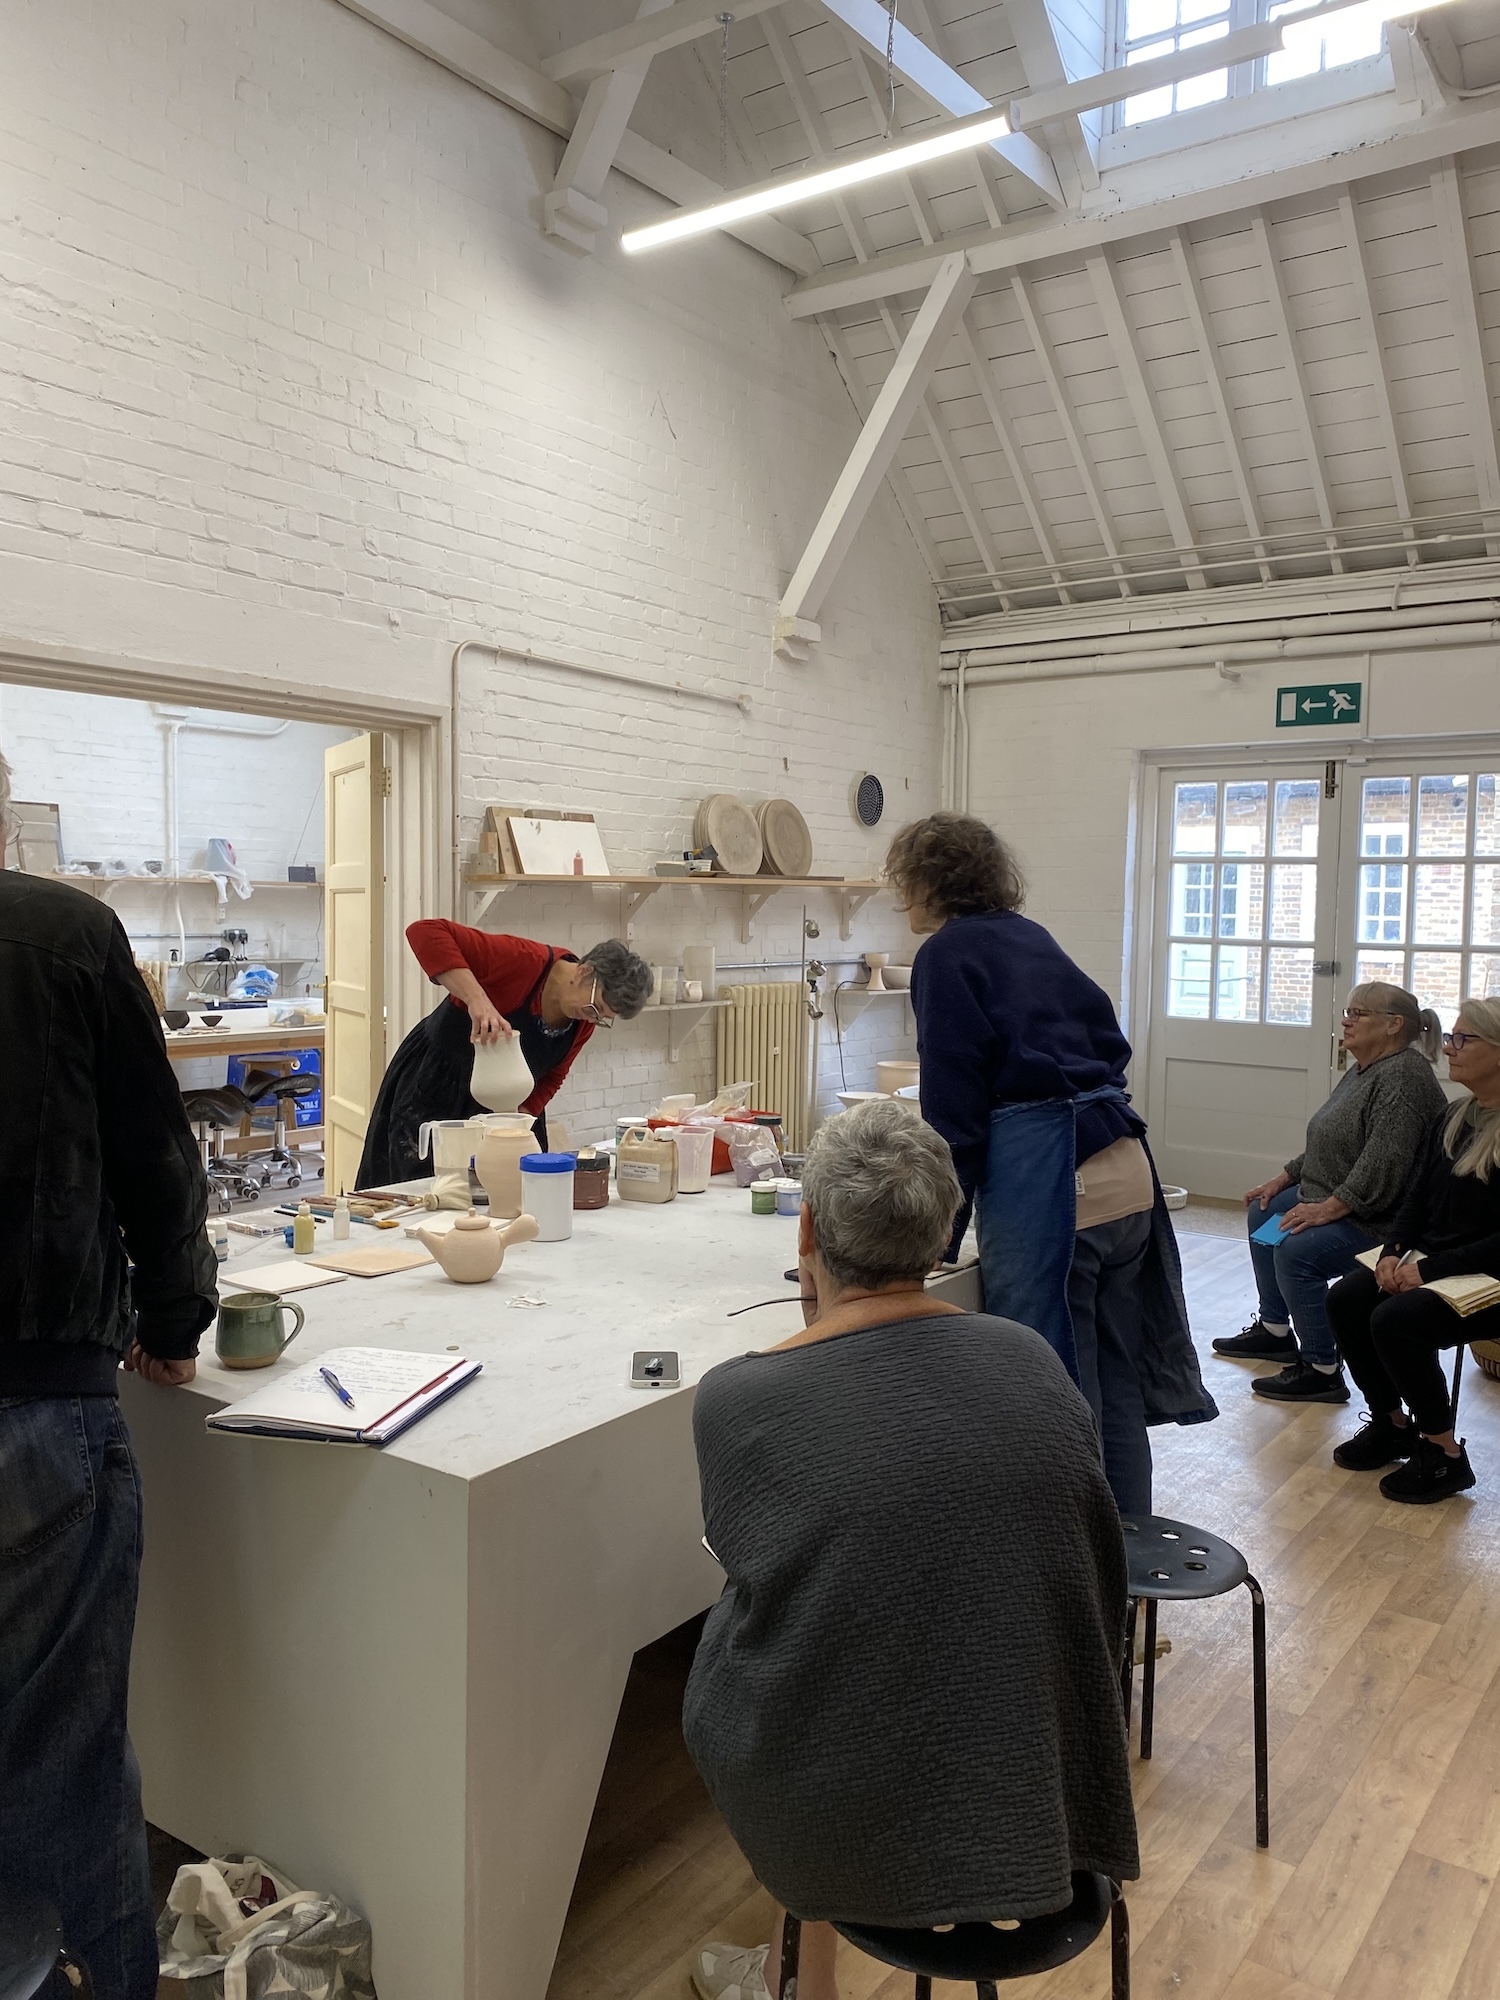 Artist Tutor demonstrating glazing techniques to students in a ceramics studio